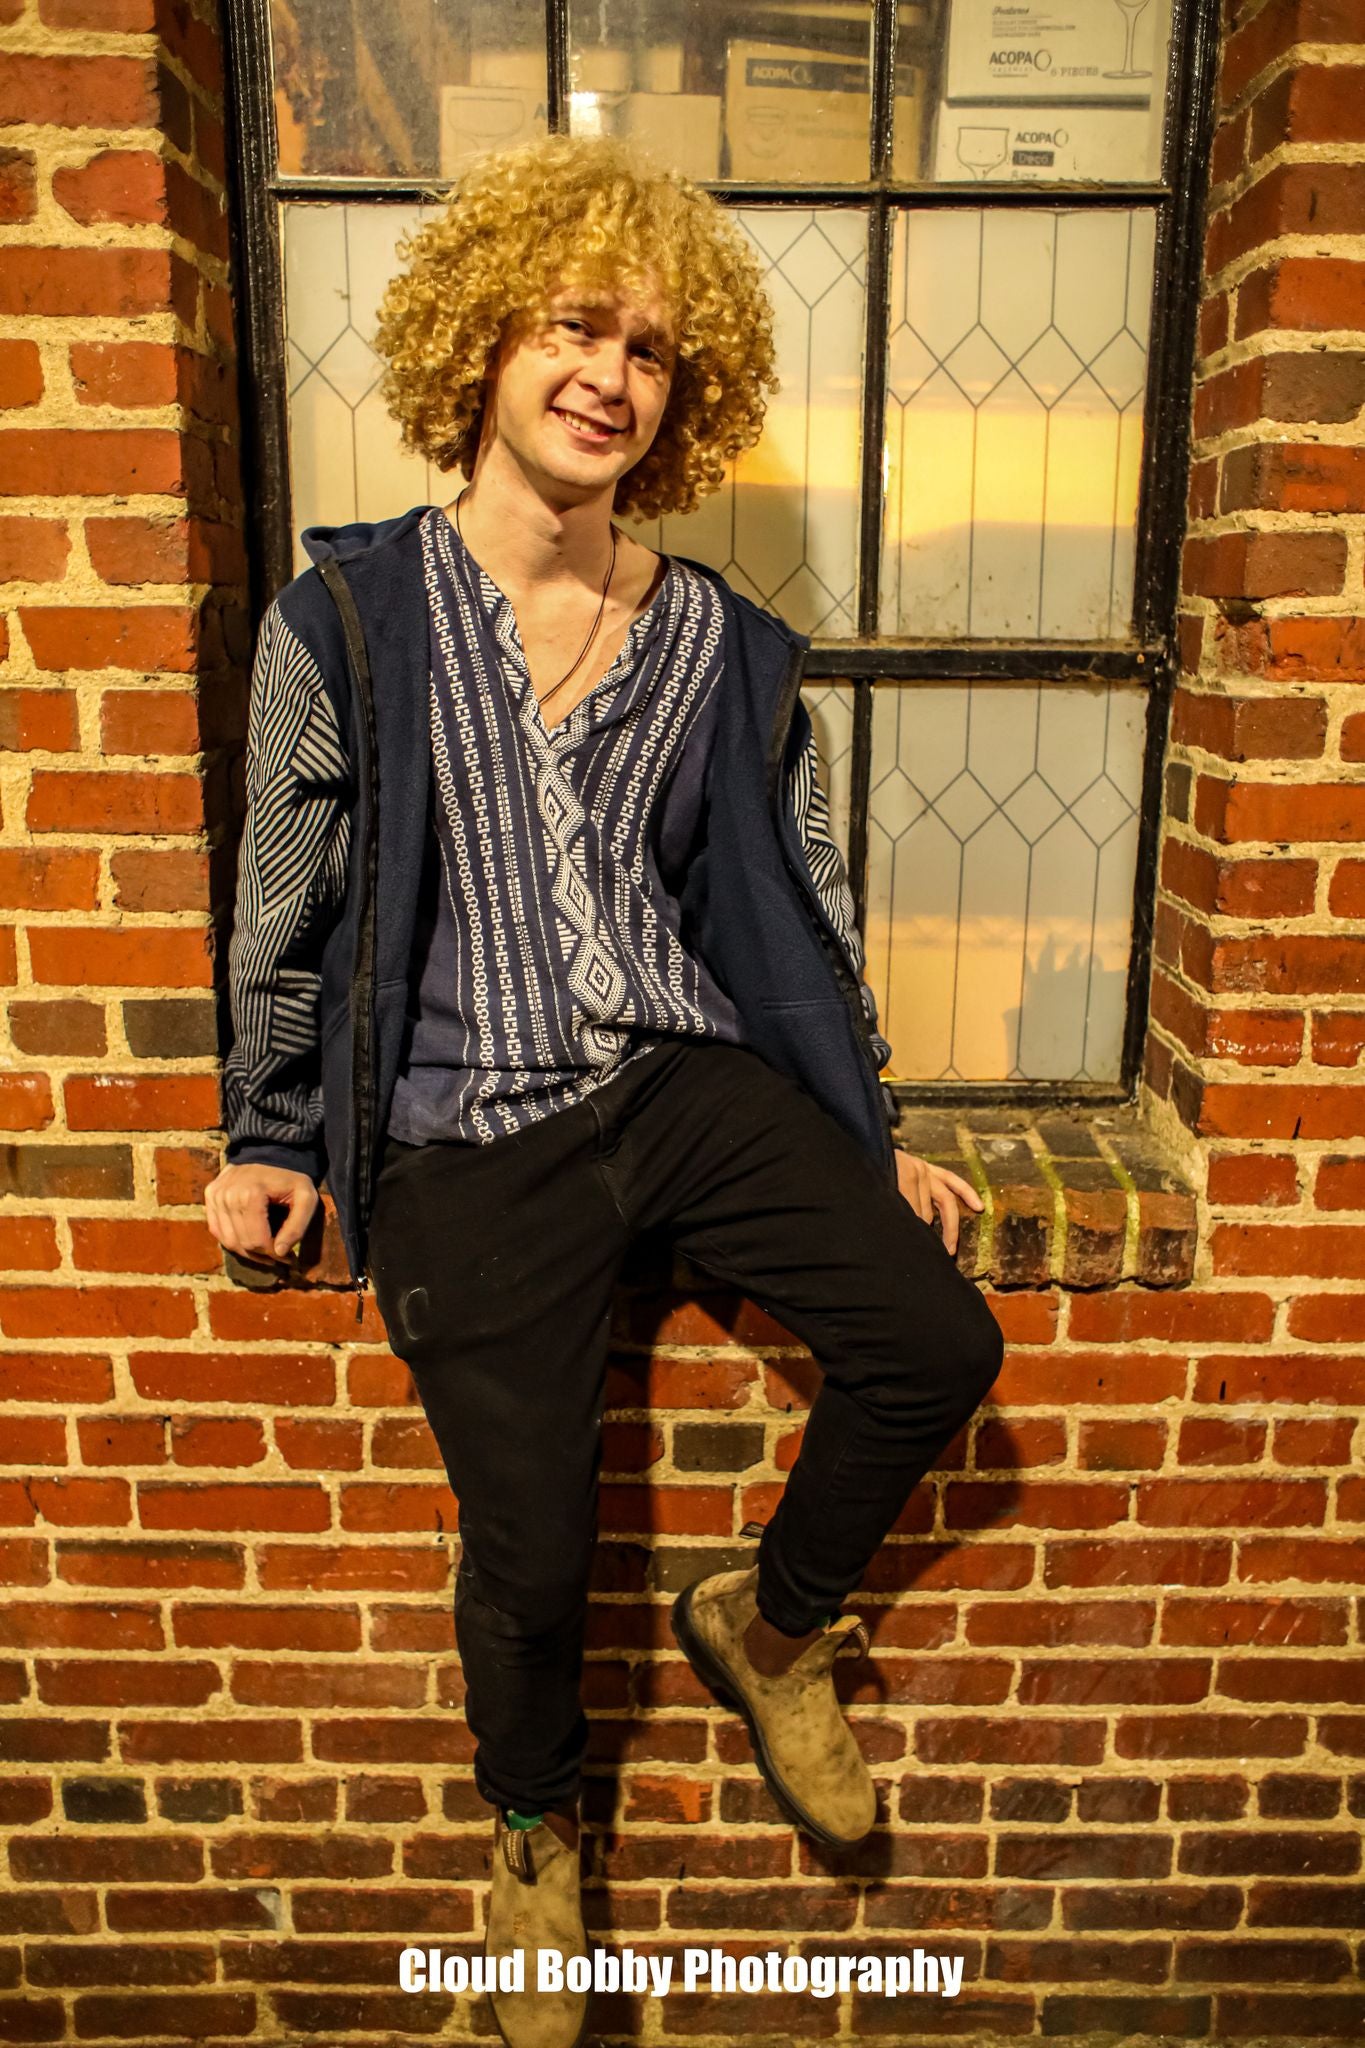 Isaac Hadden sitting on a brick wall smiling at the camera, a young man with curly blonde hair wearing a trippy T-shirt.